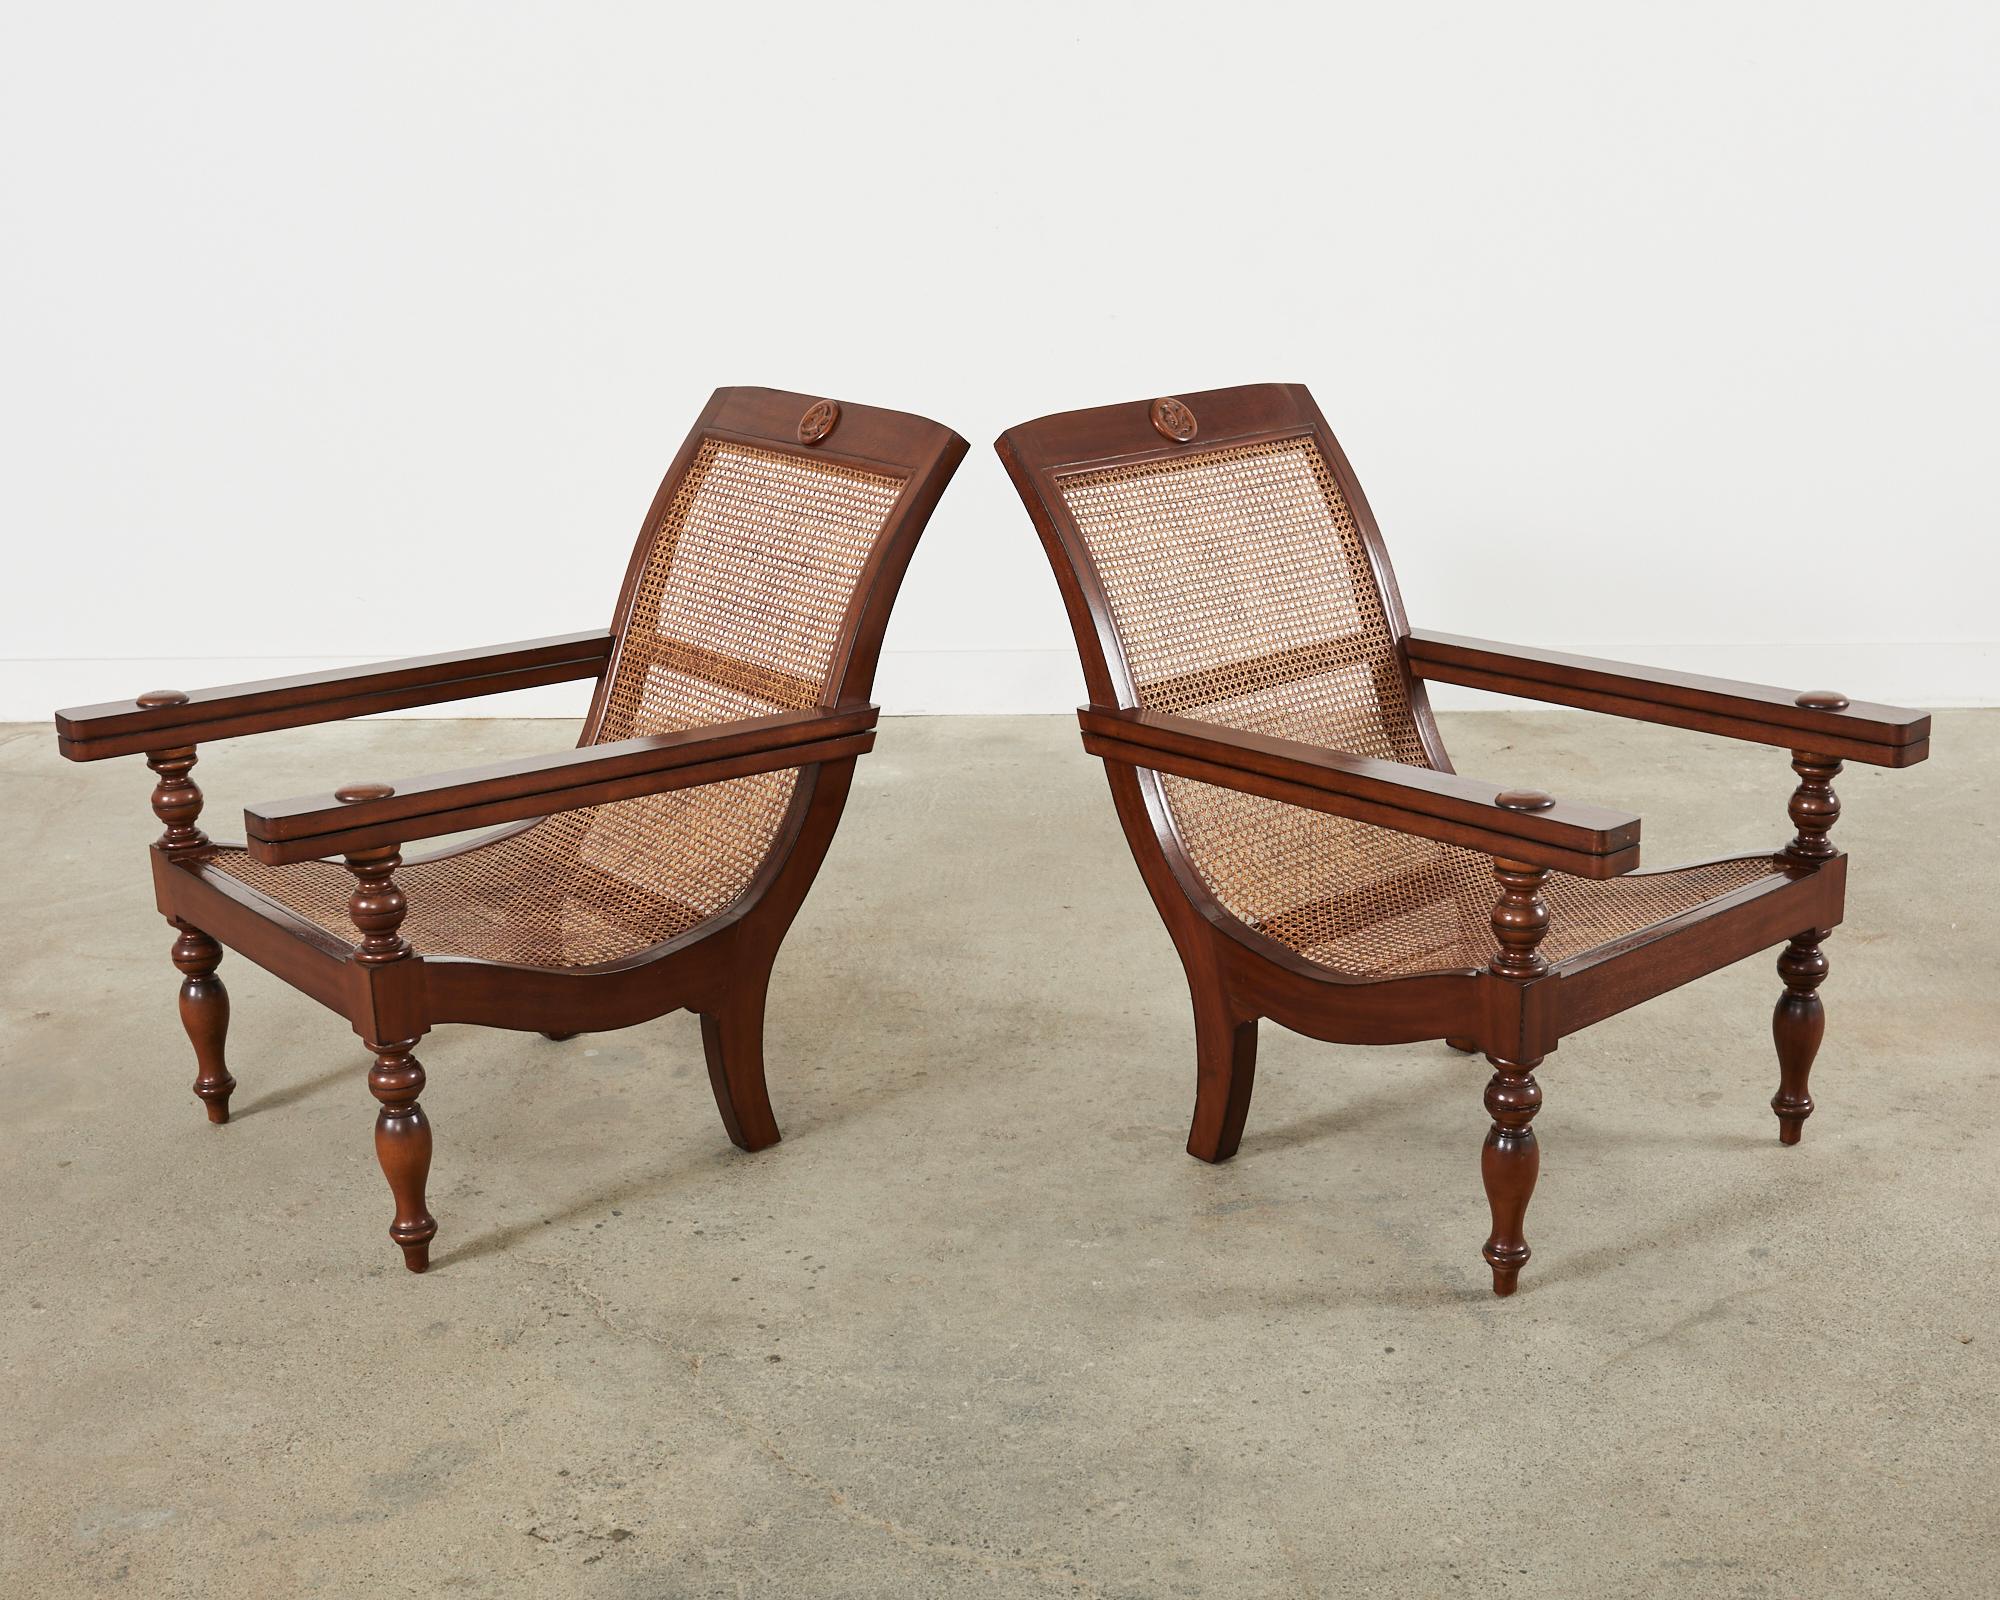 20th Century Pair of Dutch Colonial Style Mahogany Cane Plantation Chairs